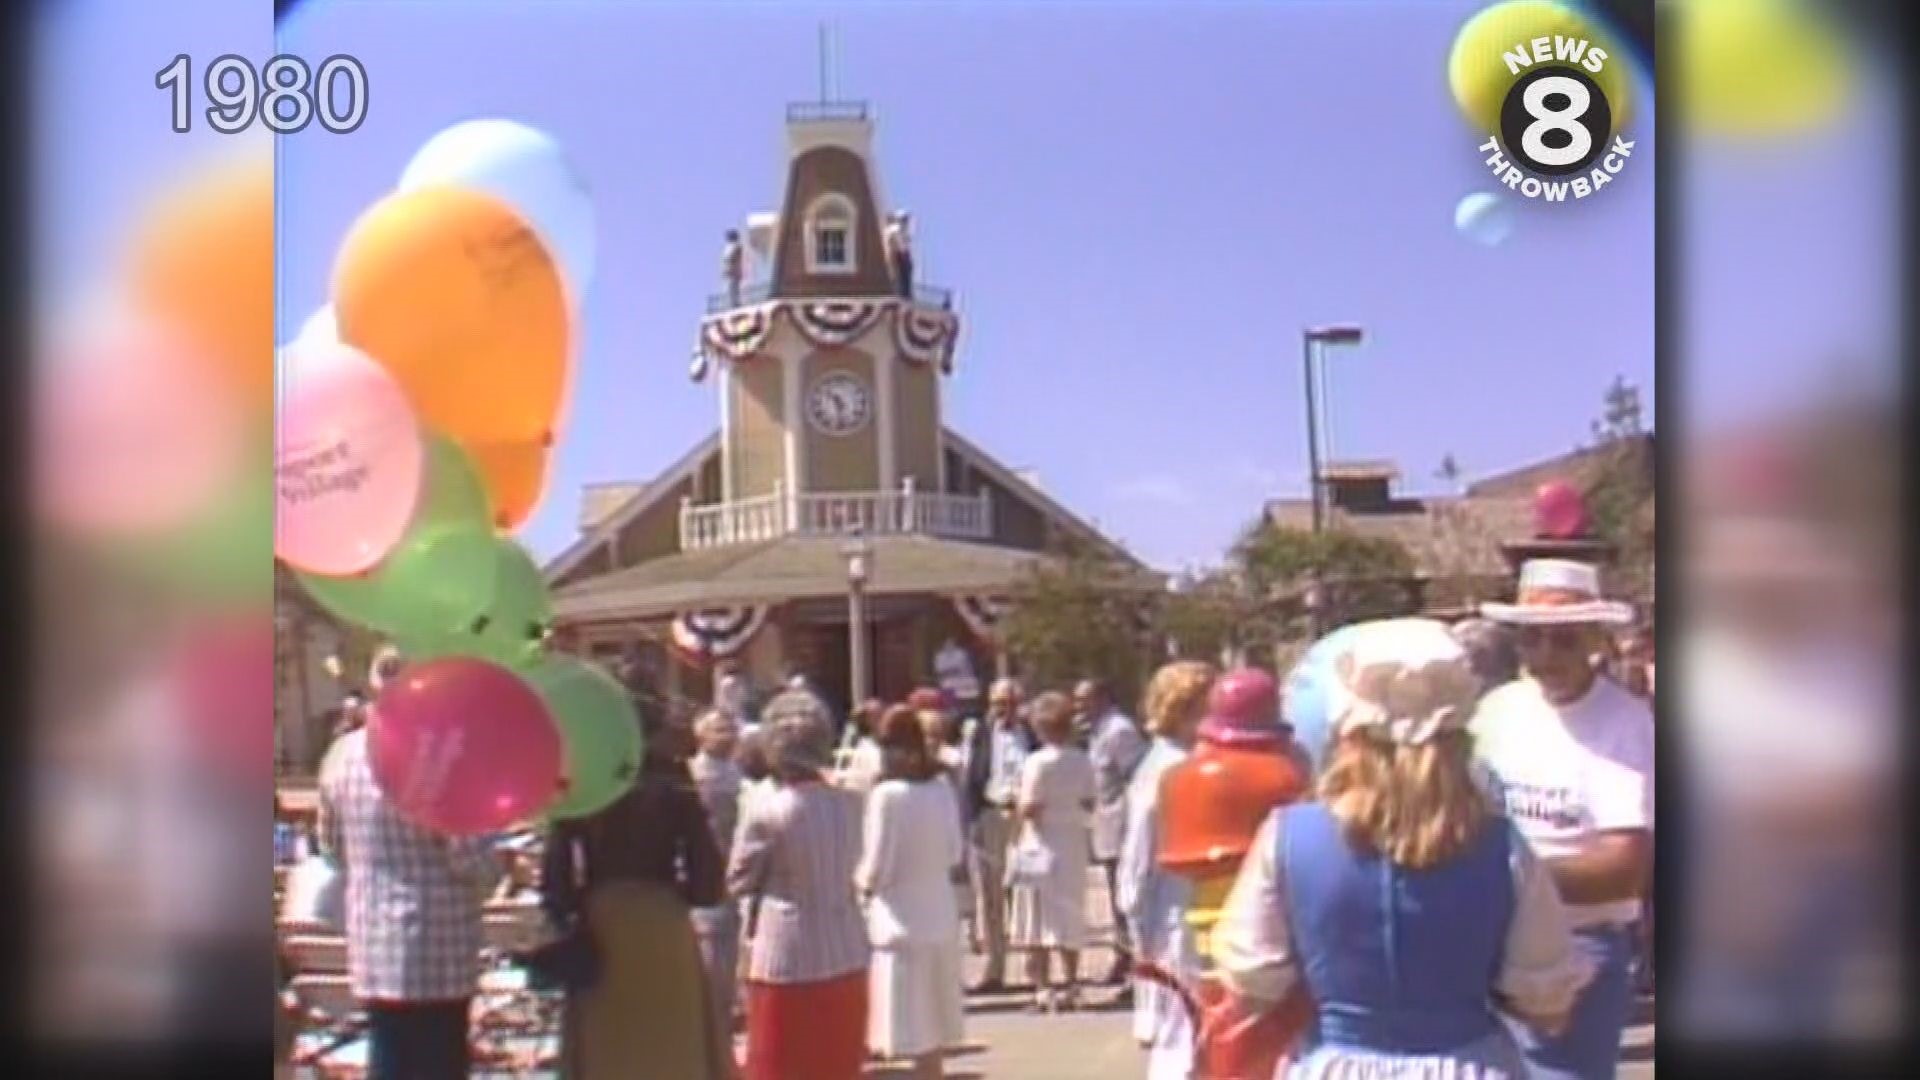 Seaport Village opens in Downtown San Diego in 1980